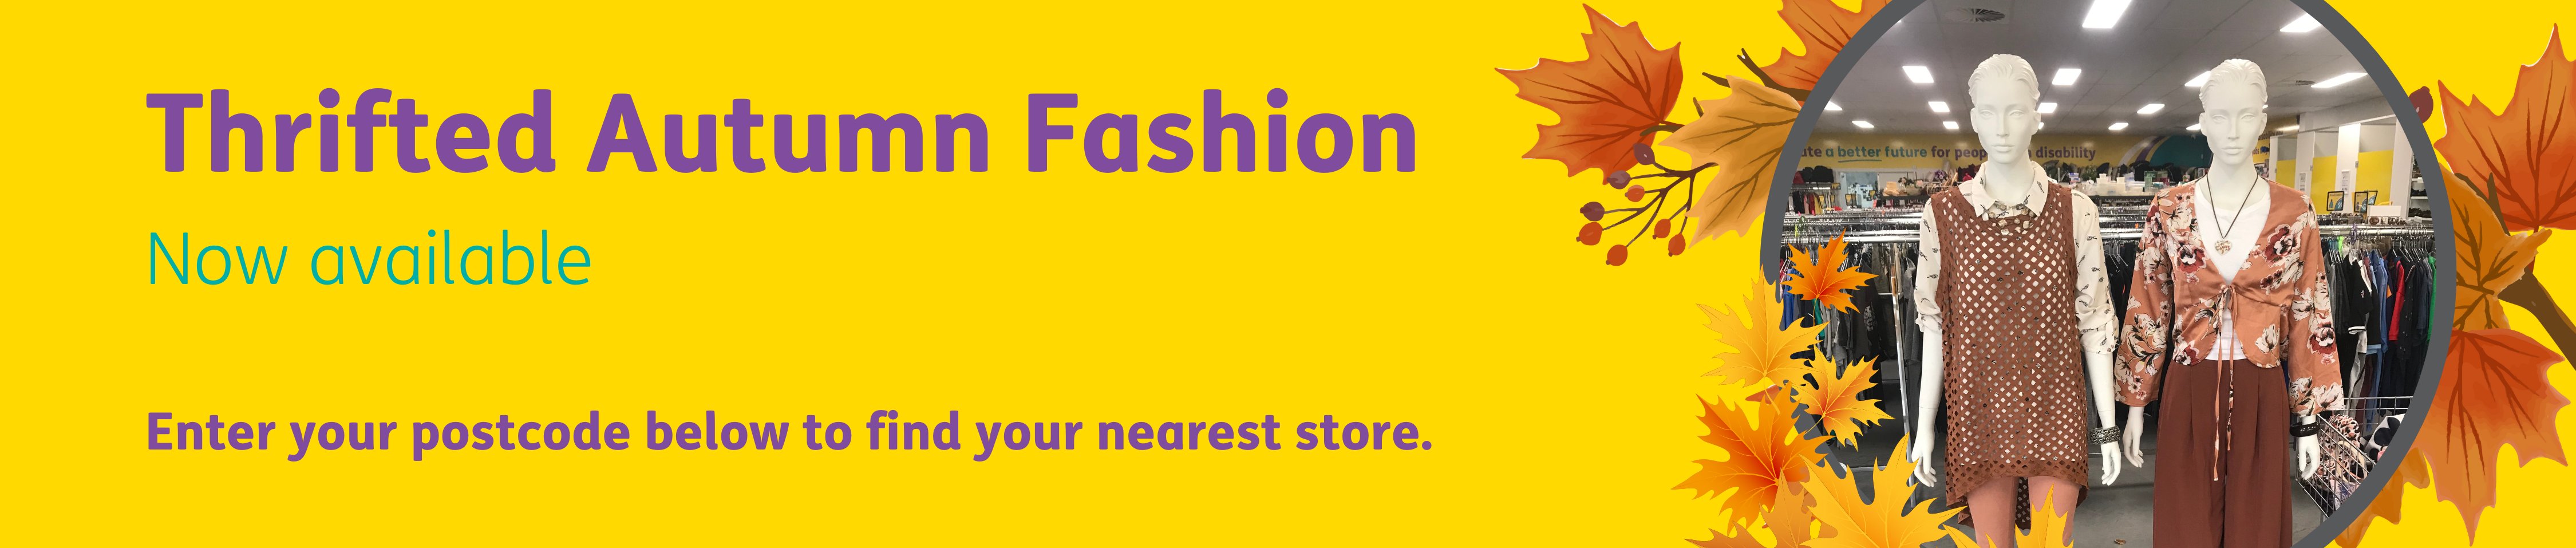 Autumn fashion. Enter your postcode below to find your nearest store.